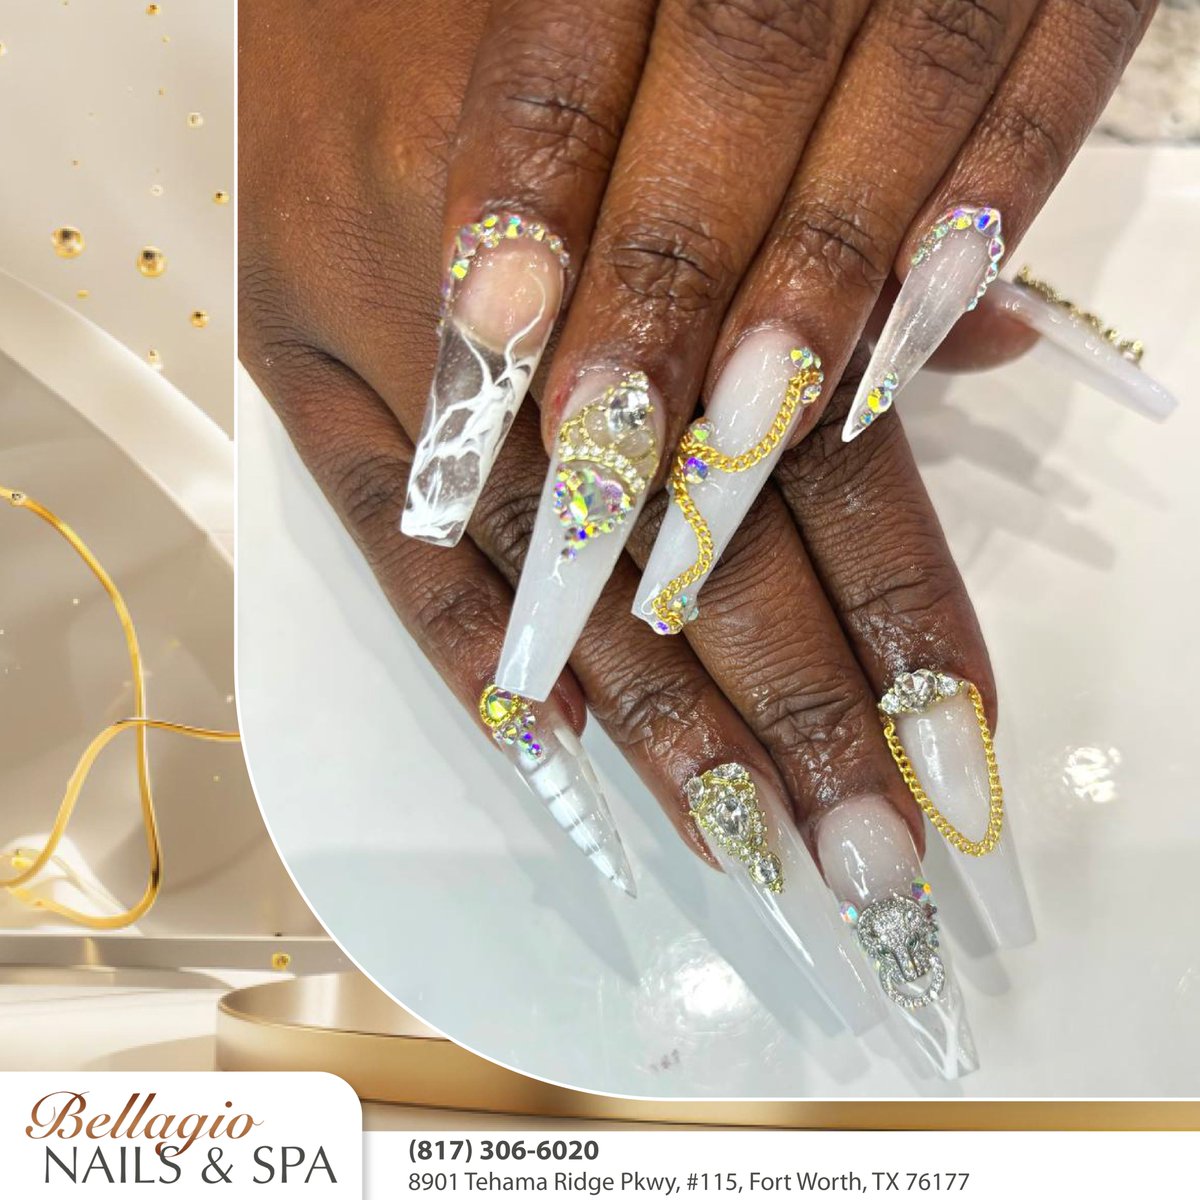 Spotted: The most stunning nails in town‼
They probably came from 𝑩𝒆𝒍𝒍𝒂𝒈𝒊𝒐 𝑵𝒂𝒊𝒍𝒔 & 𝑺𝒑𝒂!😍
#bellagionailspa #bellagiotx #bellagionails #bellagiofortworth #nailsalonfortworth #nailsalontx #nail #nailsoftheday #longnails #naildesign #nailsalonnearme #glitternails